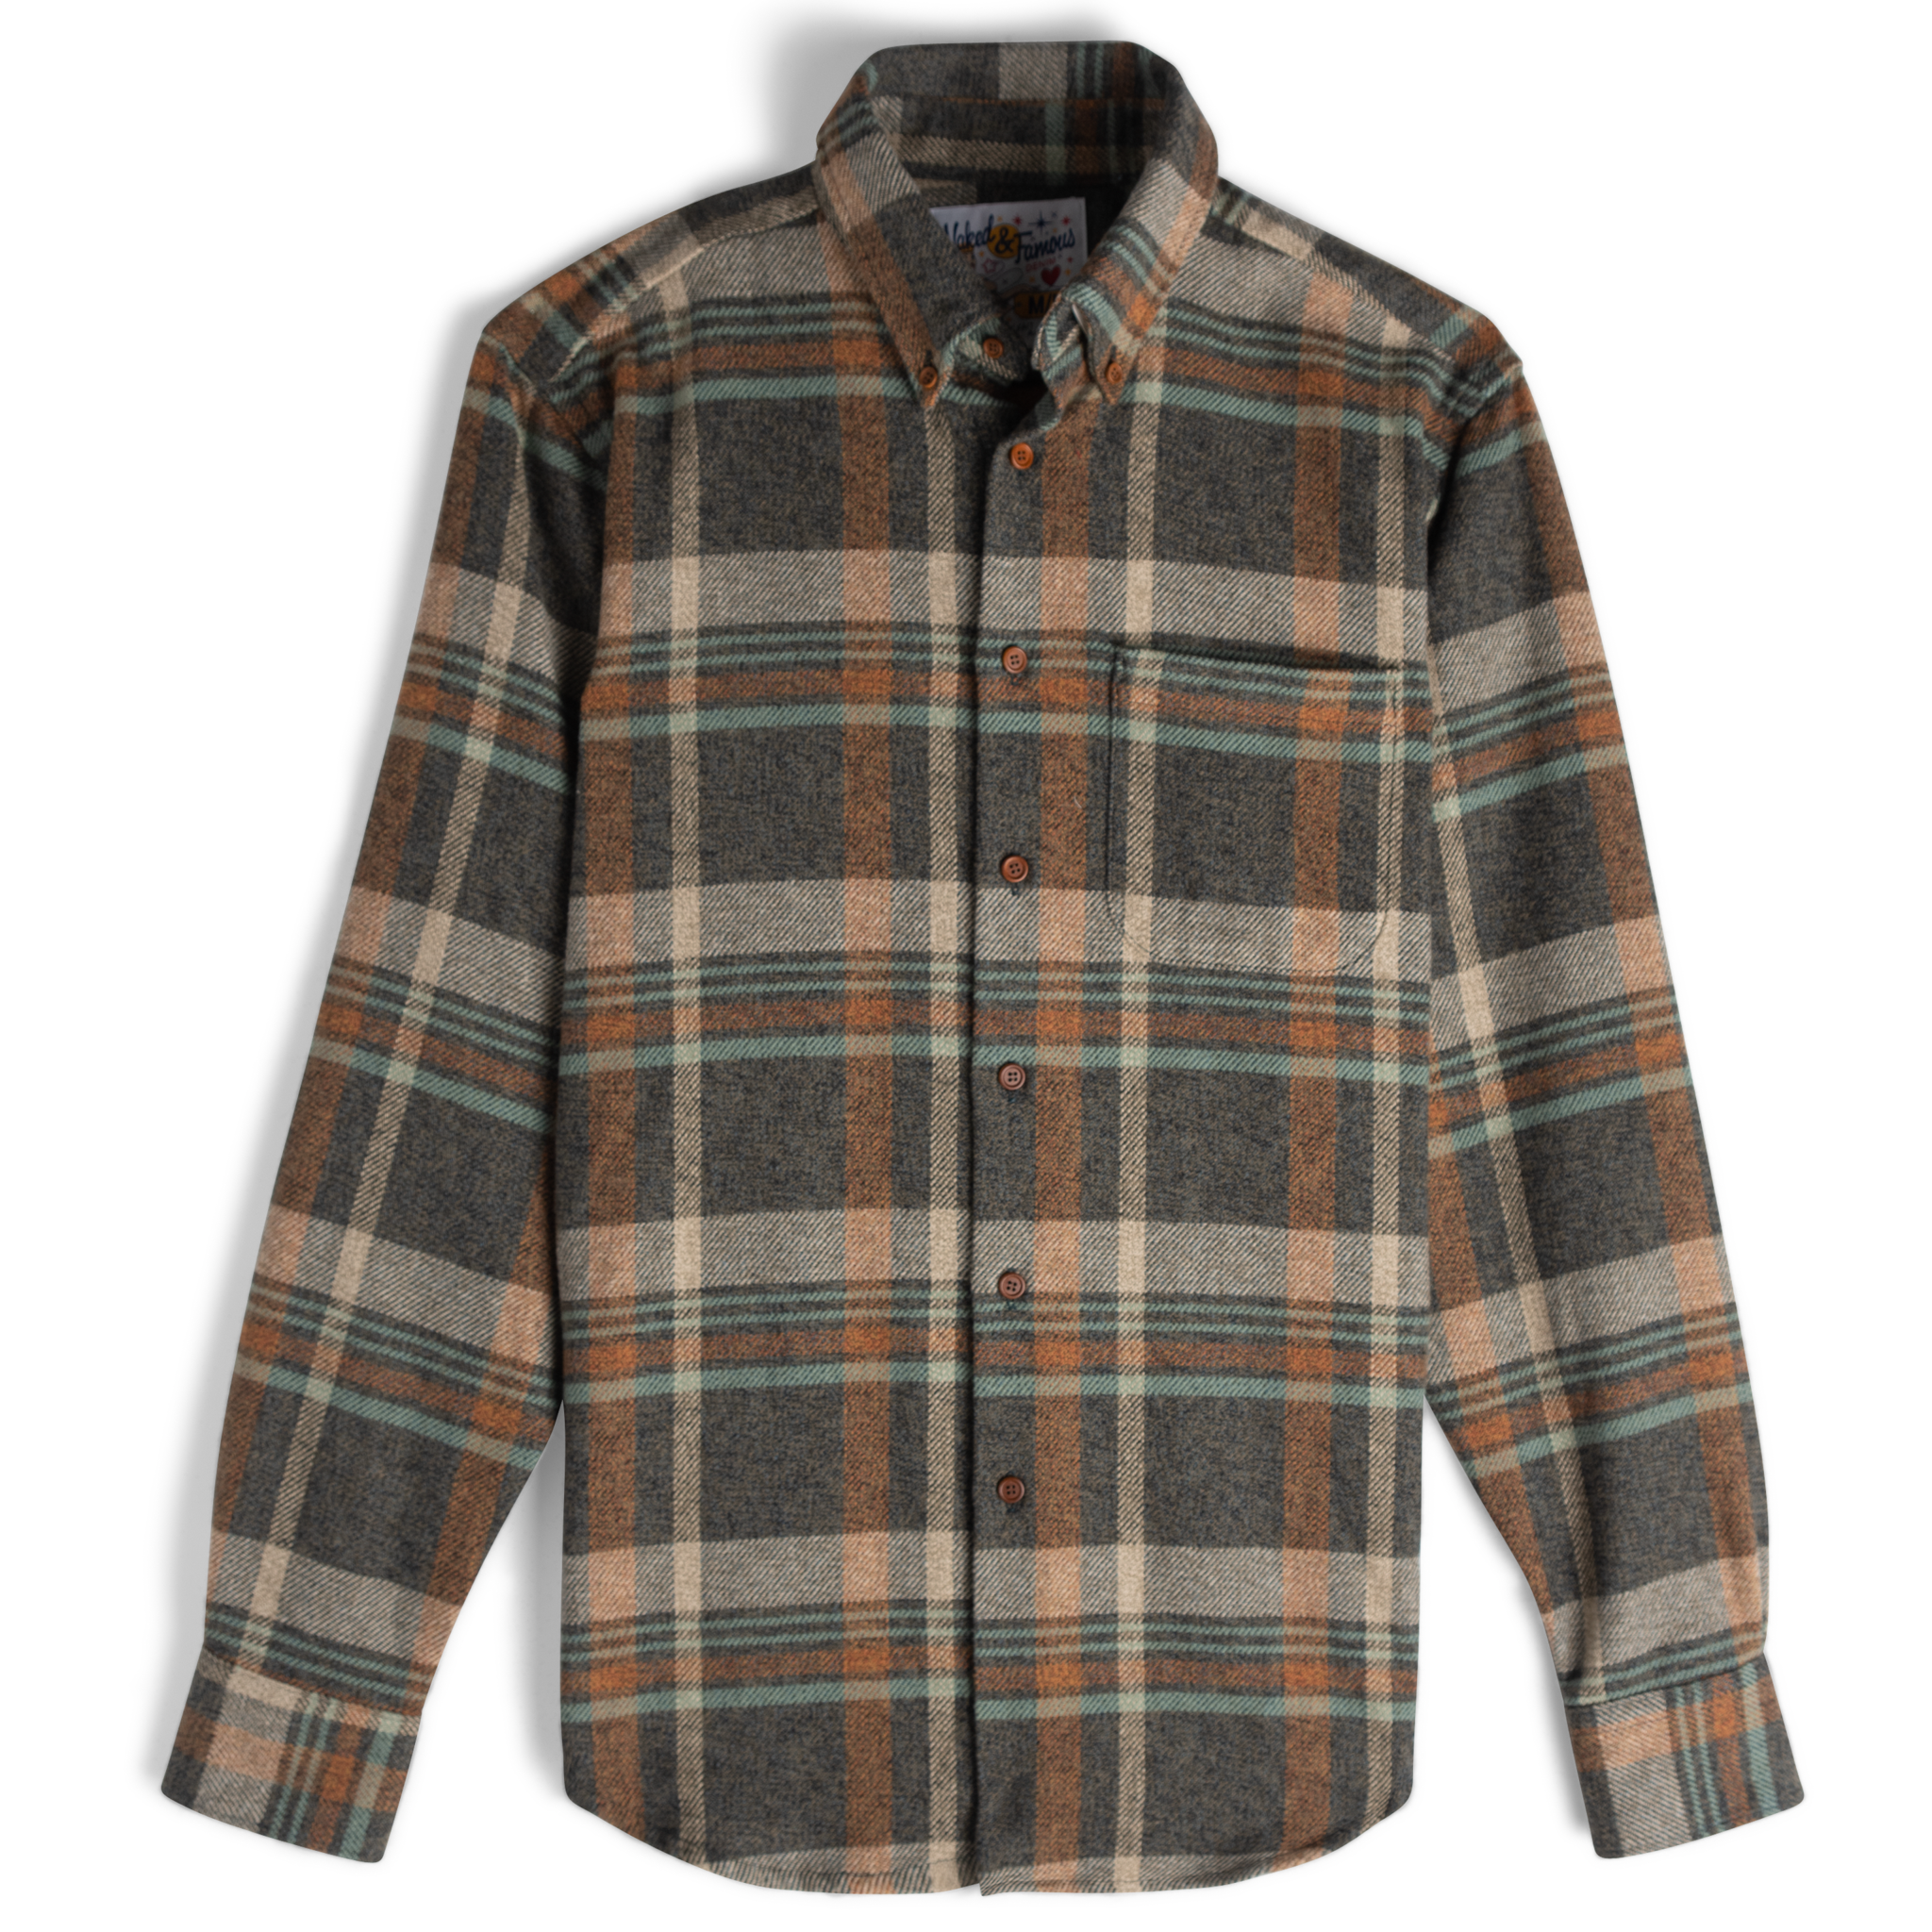  Easy Shirt - Heavy Vintage Flannel - Blue/Rust - Flat Front 